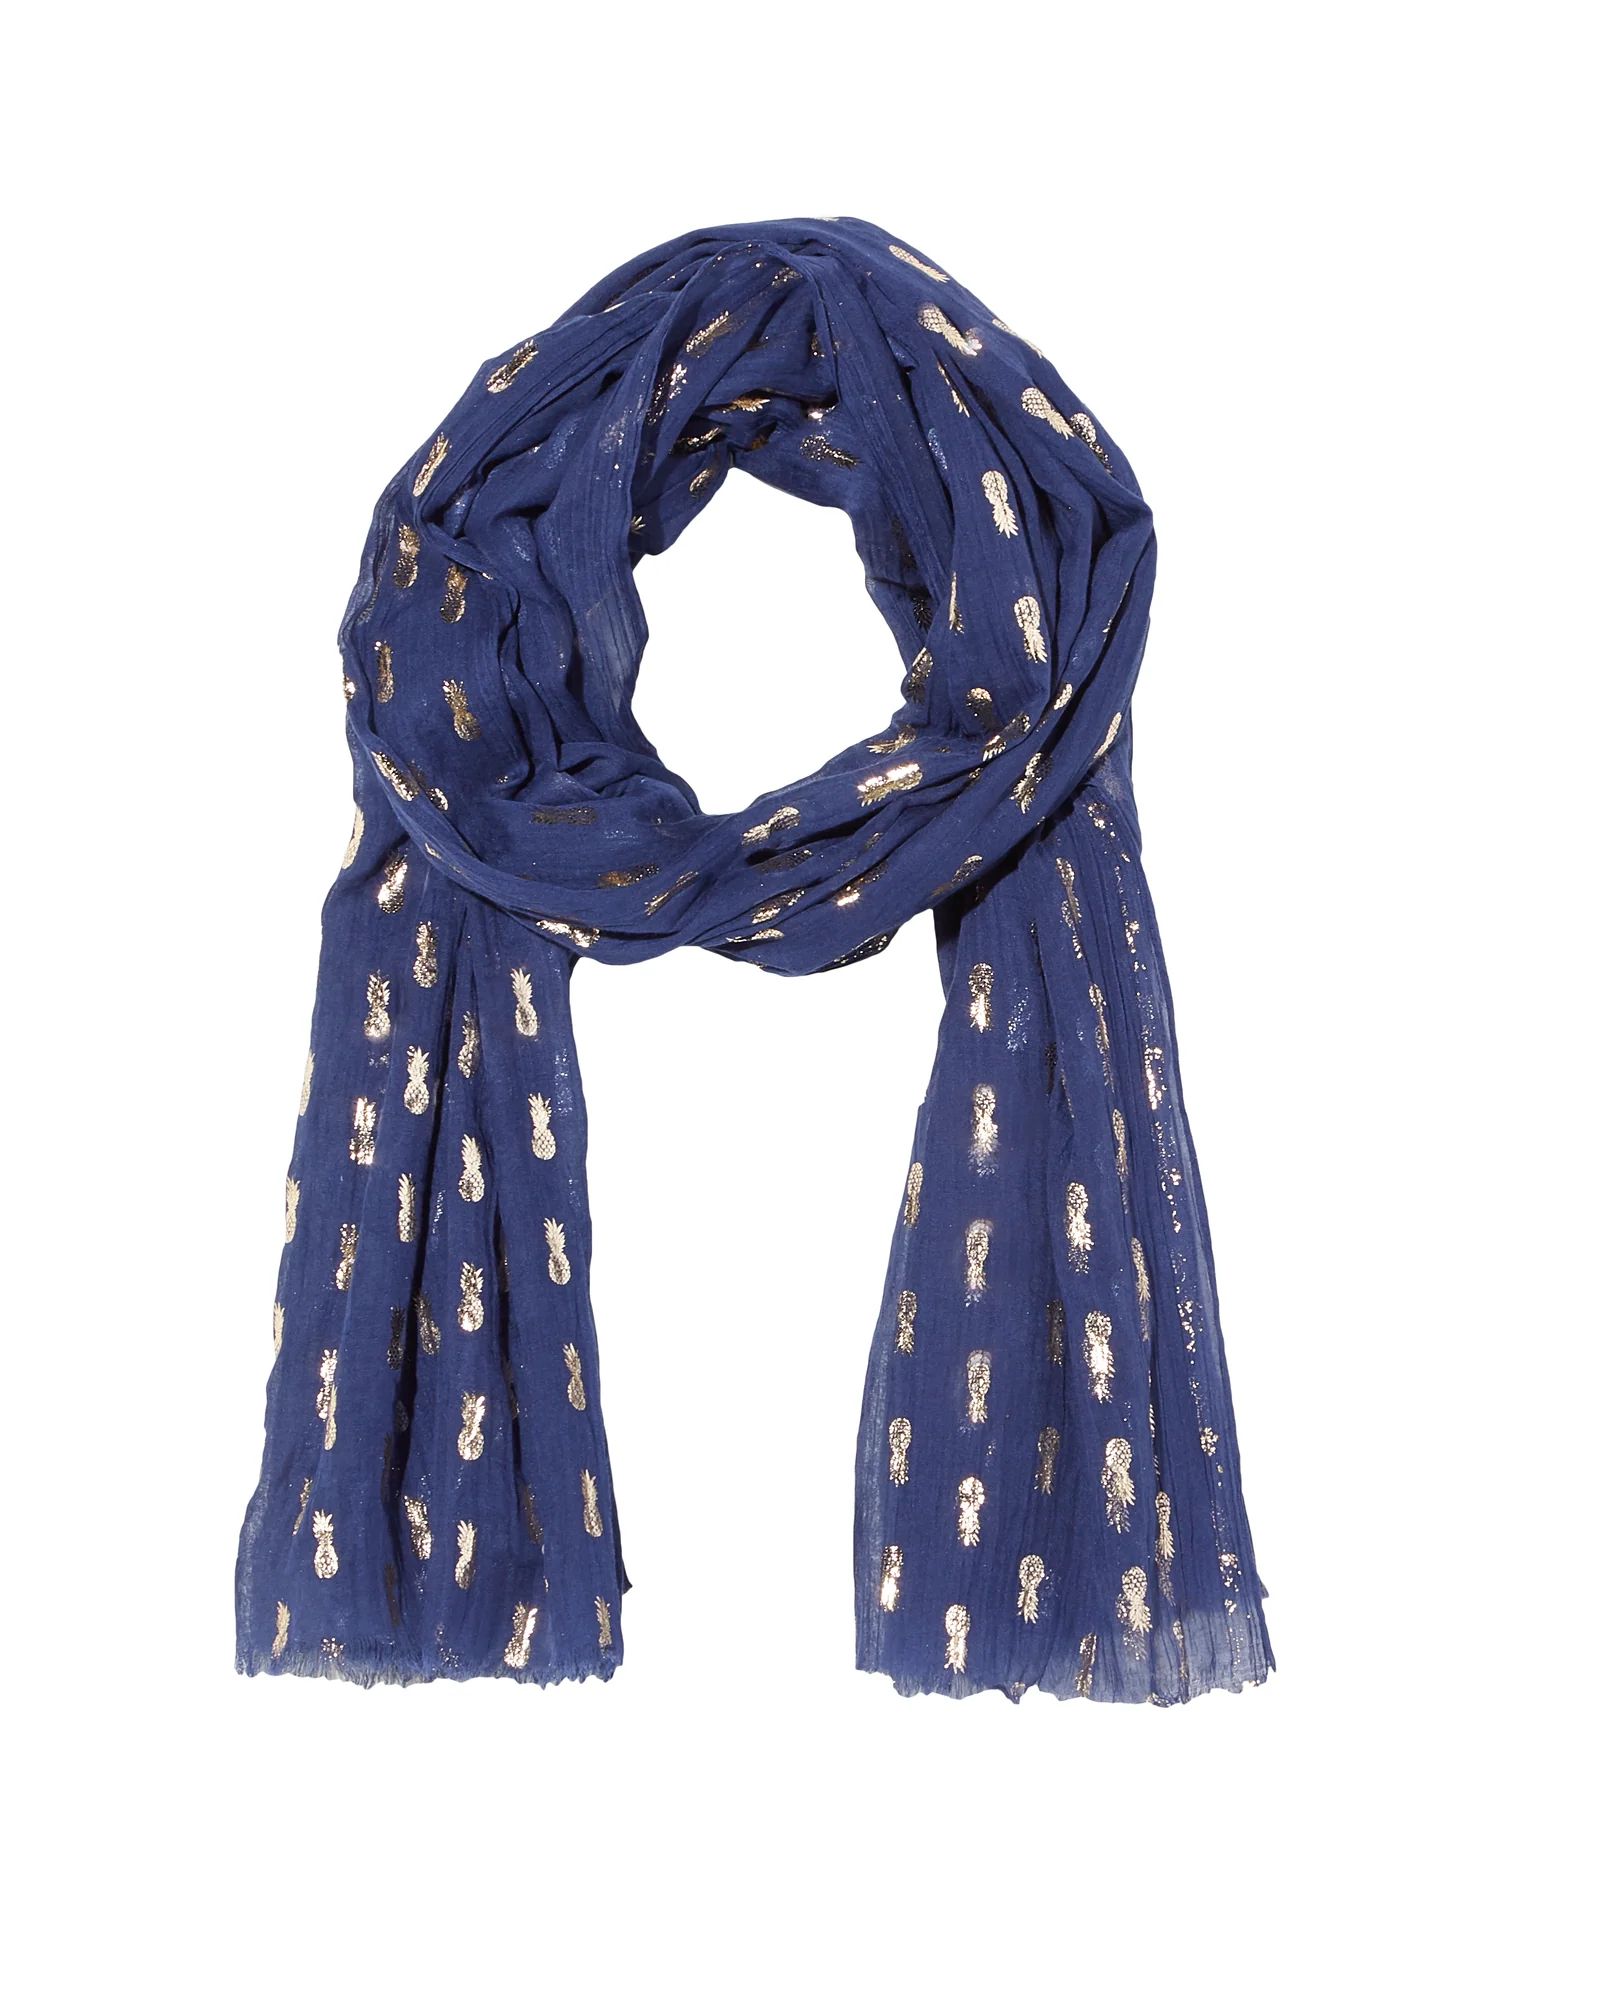 Dia & Co Flushing Scarf | Navy / Silver | Women's Accessories | Dia & Co